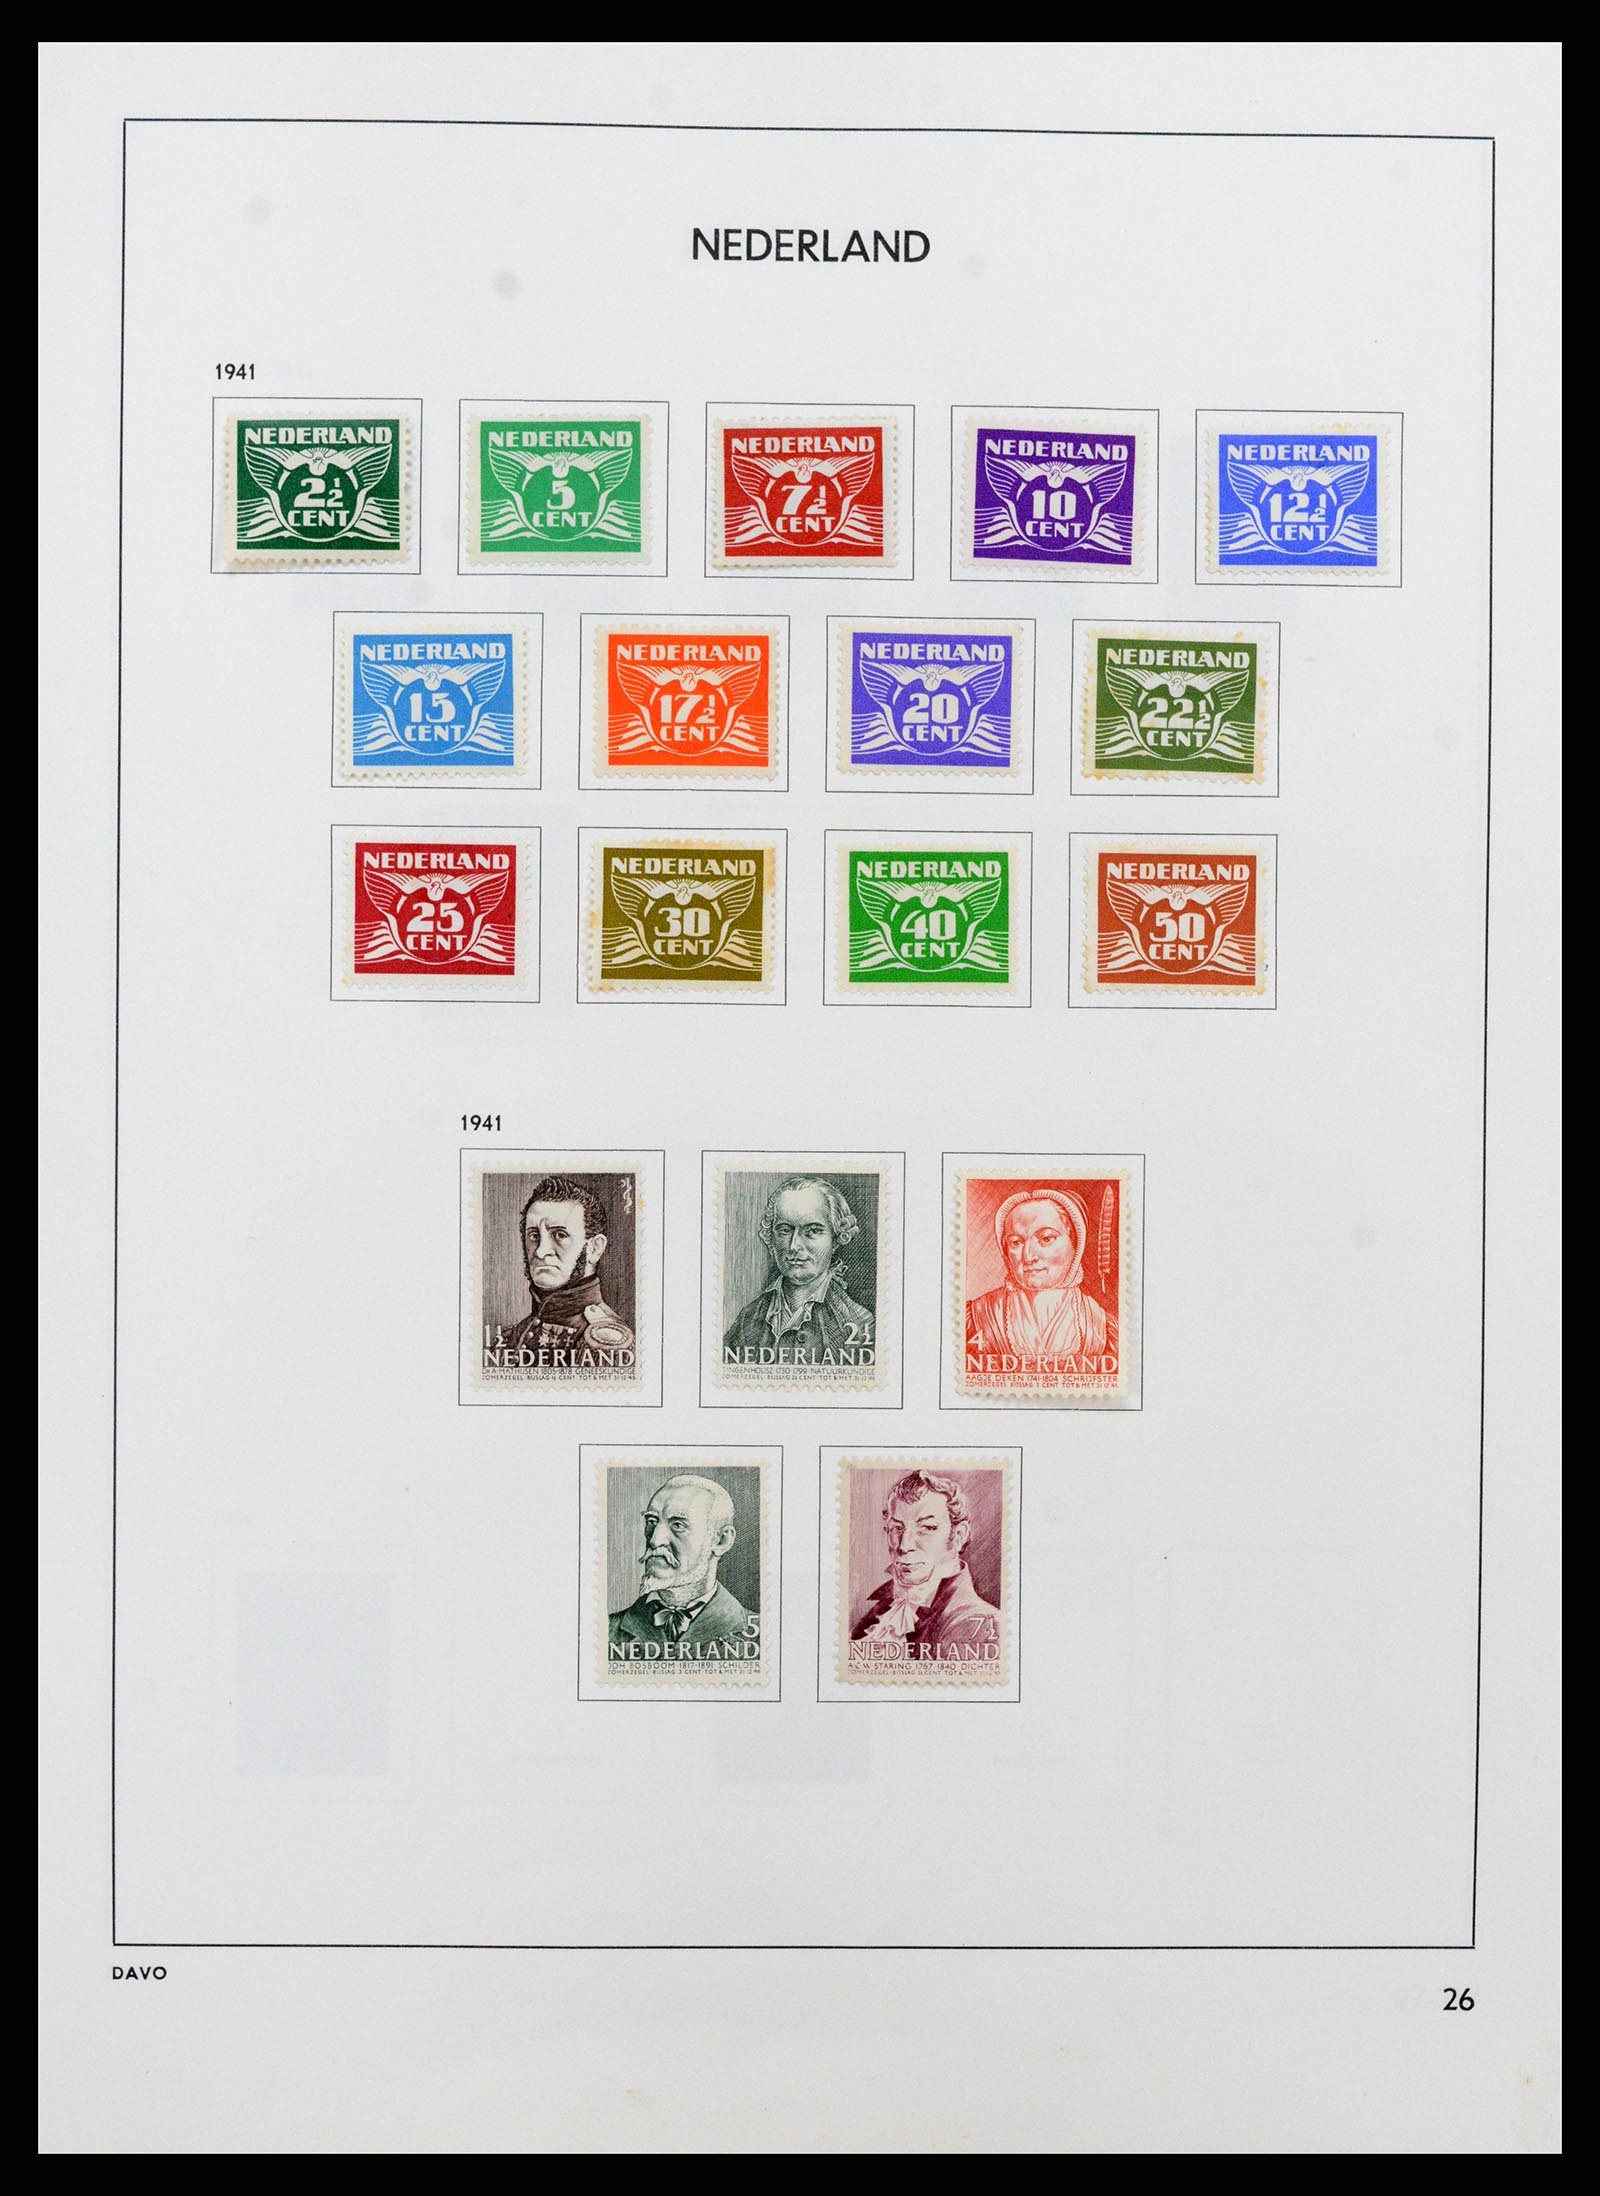 37713 026 - Stamp collection 37713 Netherlands 1864-1980.